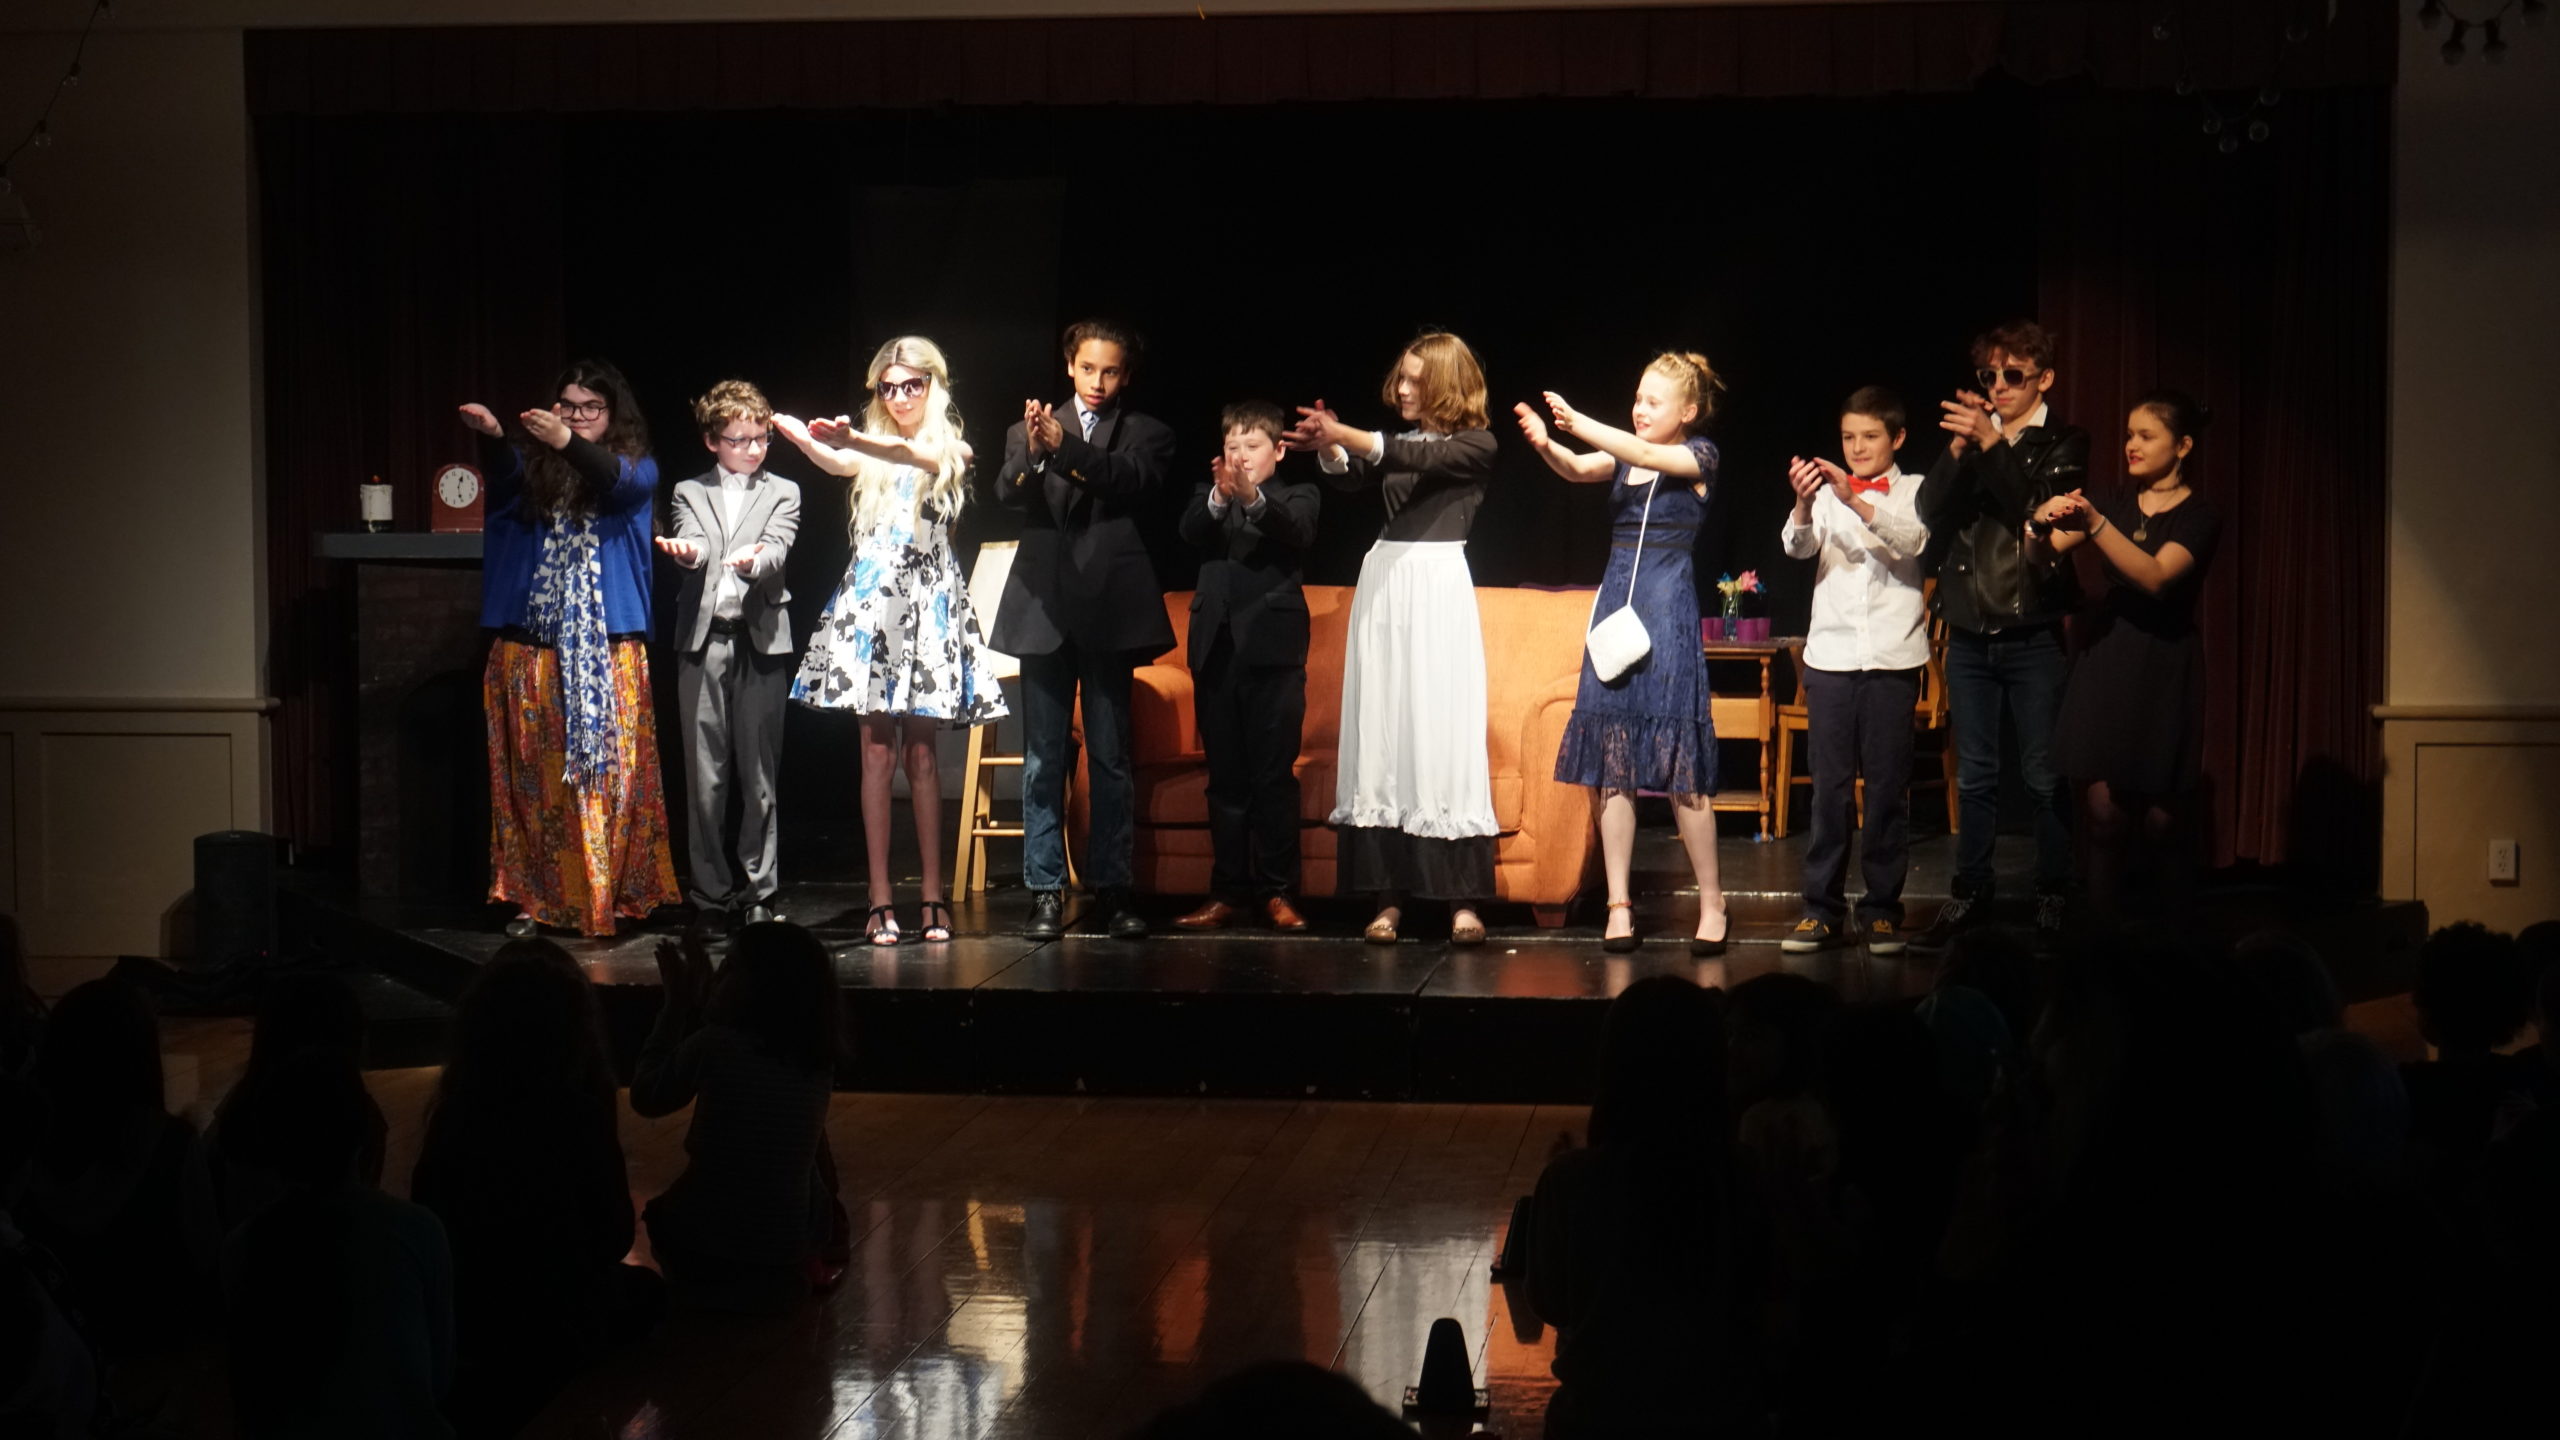 Middle school student performing arts project for Cambridge Friends School Drama